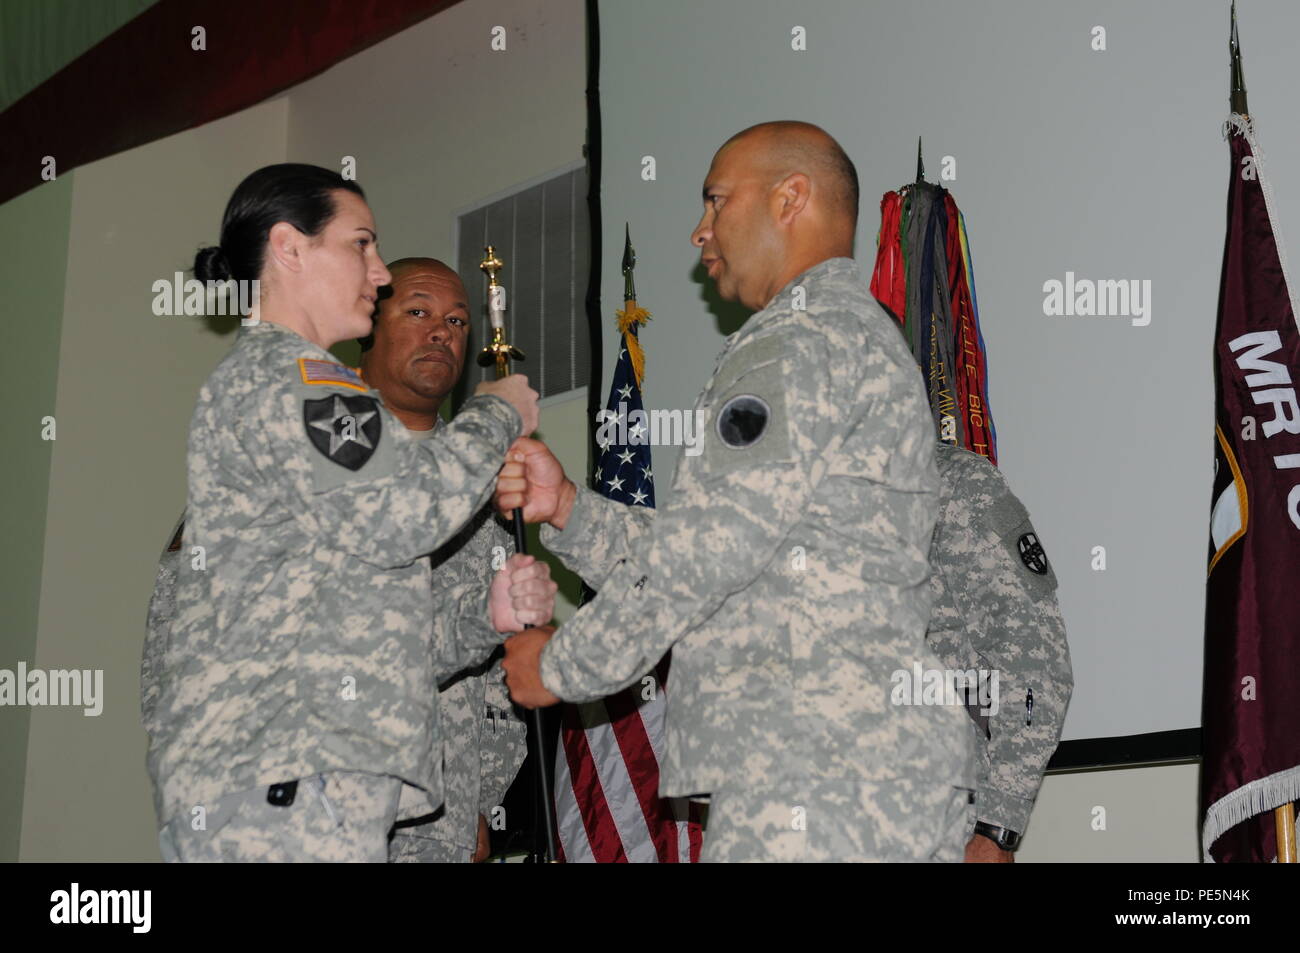 The final step in the change of responsibility ceremony is shown, when Command Sgt. Maj. Juan M. Loera Jr., the new command sergeant major for the Medical Readiness and Training Command, releases the noncommissioned officer sword back to the sword custodian, Staff Sgt. Jamie Stockton, Surgeon Section, AR-MEDCOM, the morning of Sept. 24, 2015, here at the Army Reserve Medical Command Headquarters. Stock Photo